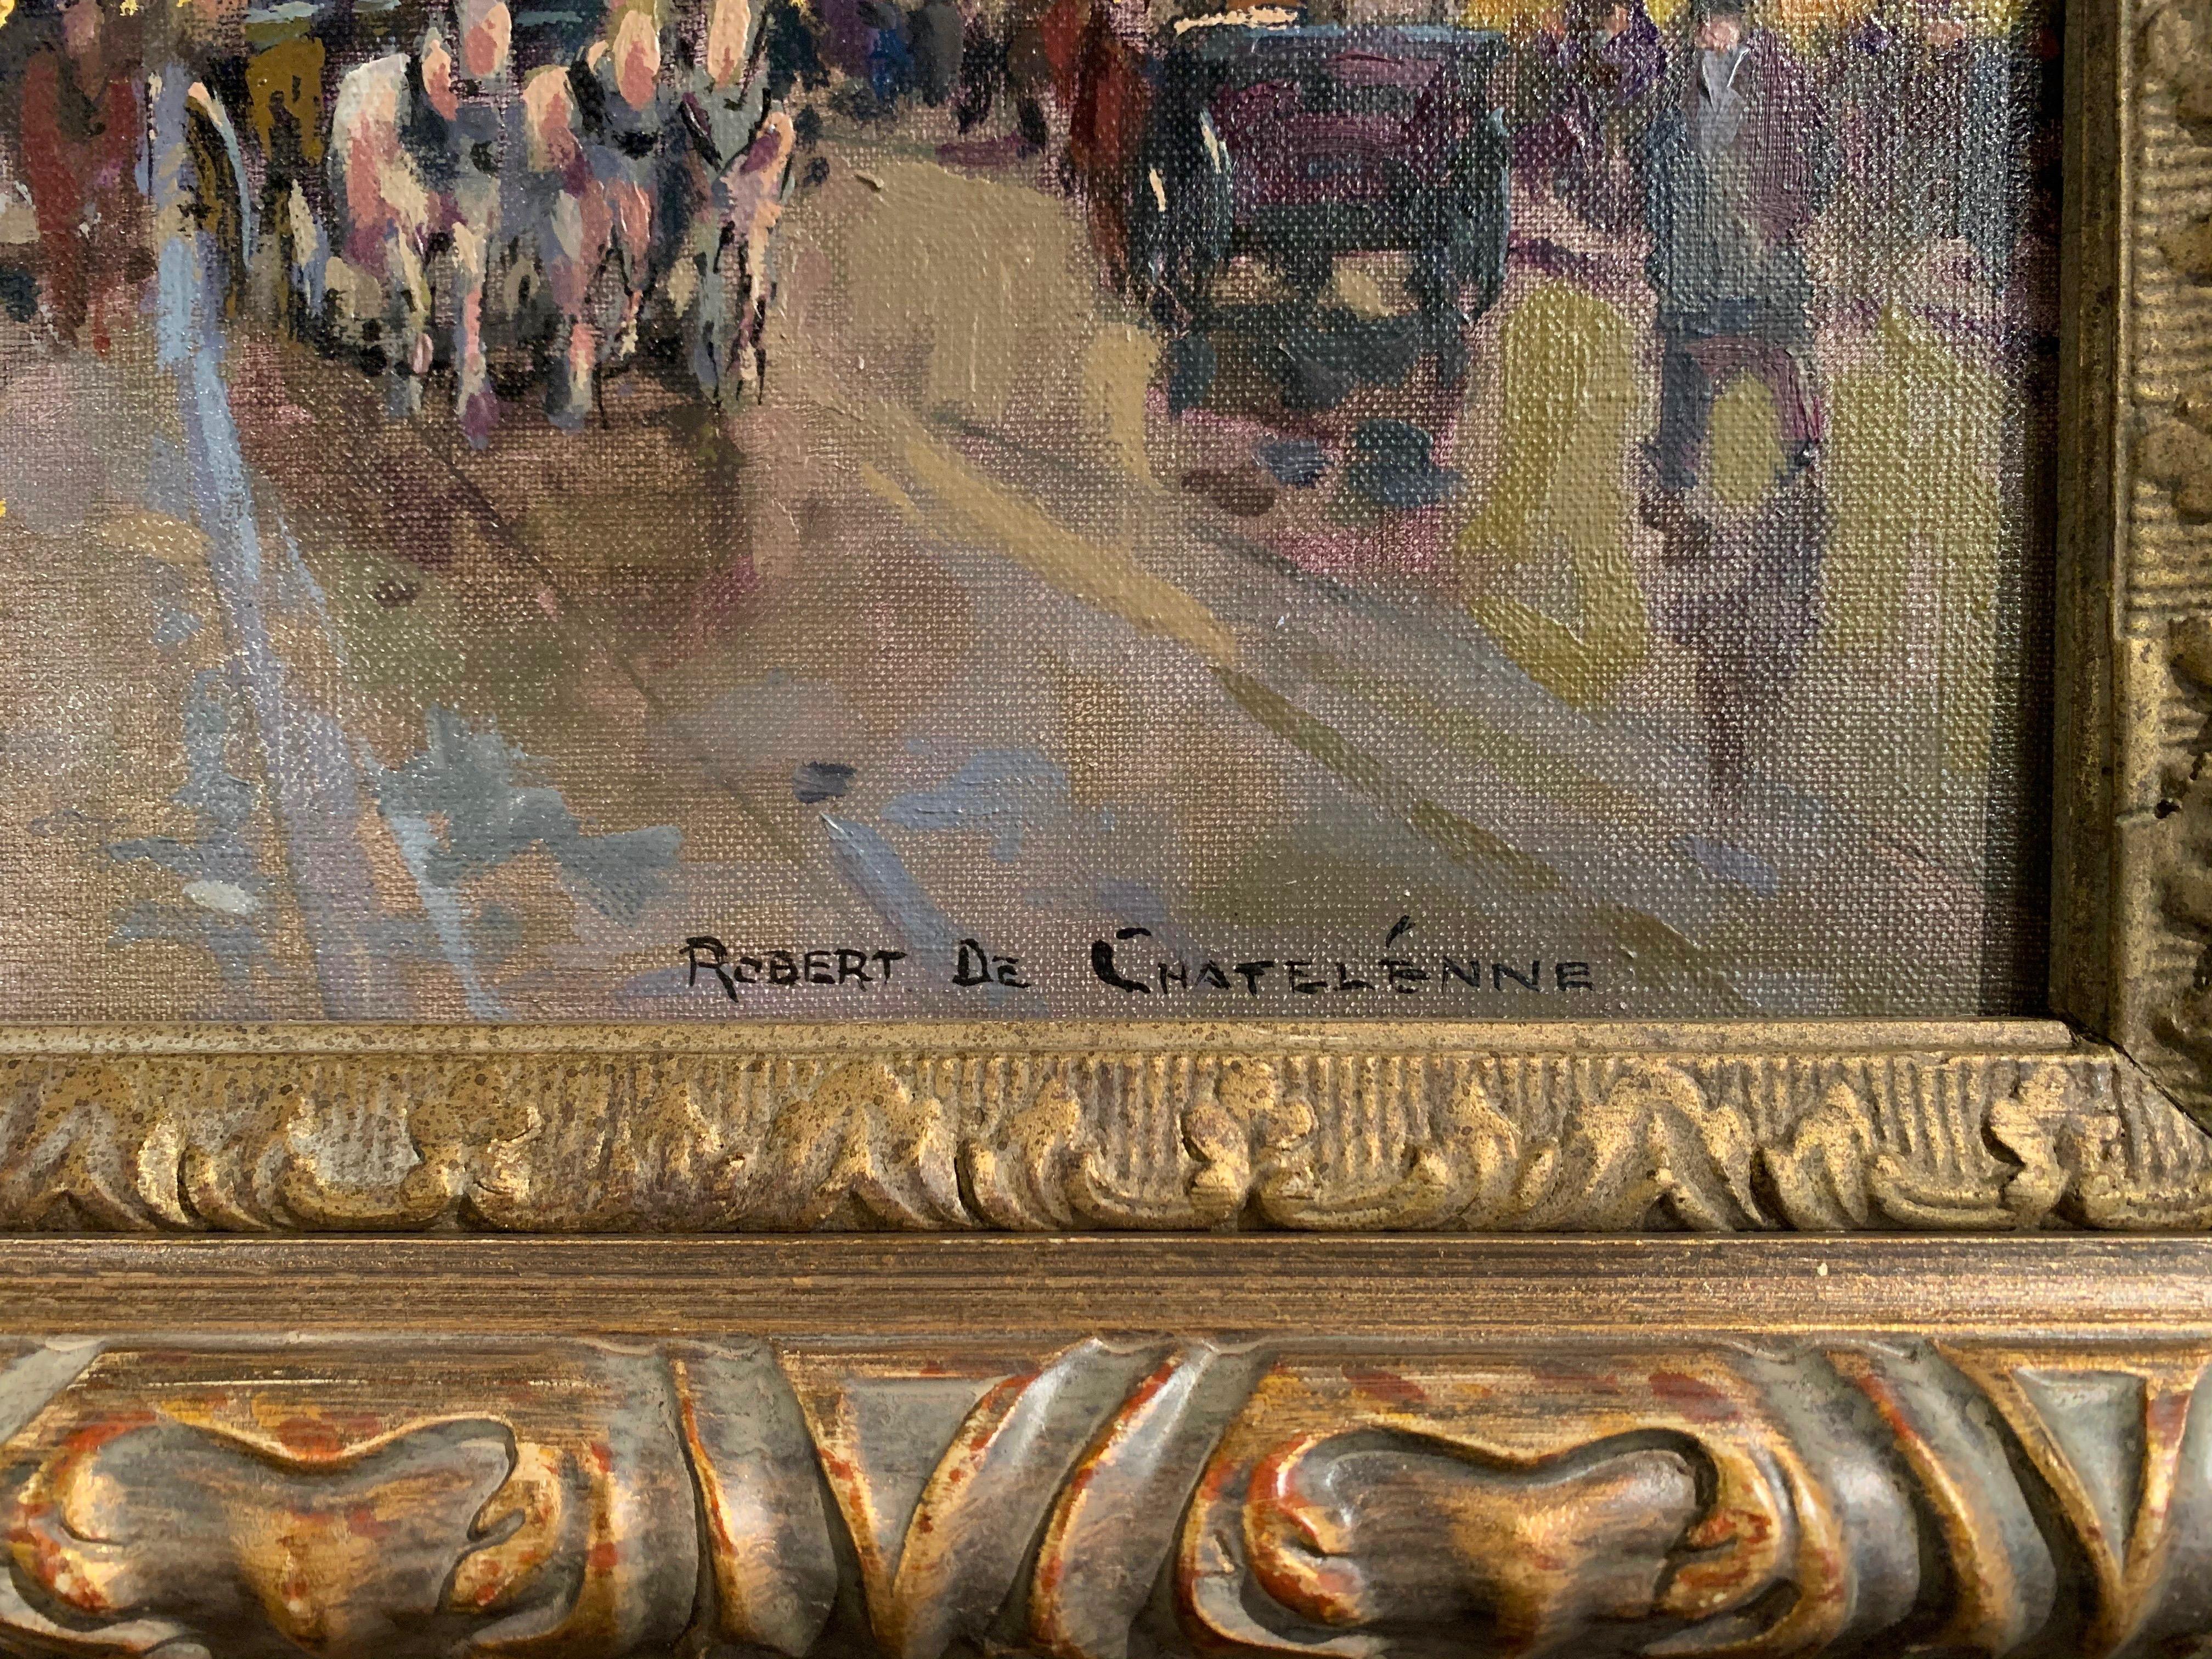 American Midcentury Parisian Street Oil Painting in Gilt Frame Signed R. de Chatelenne